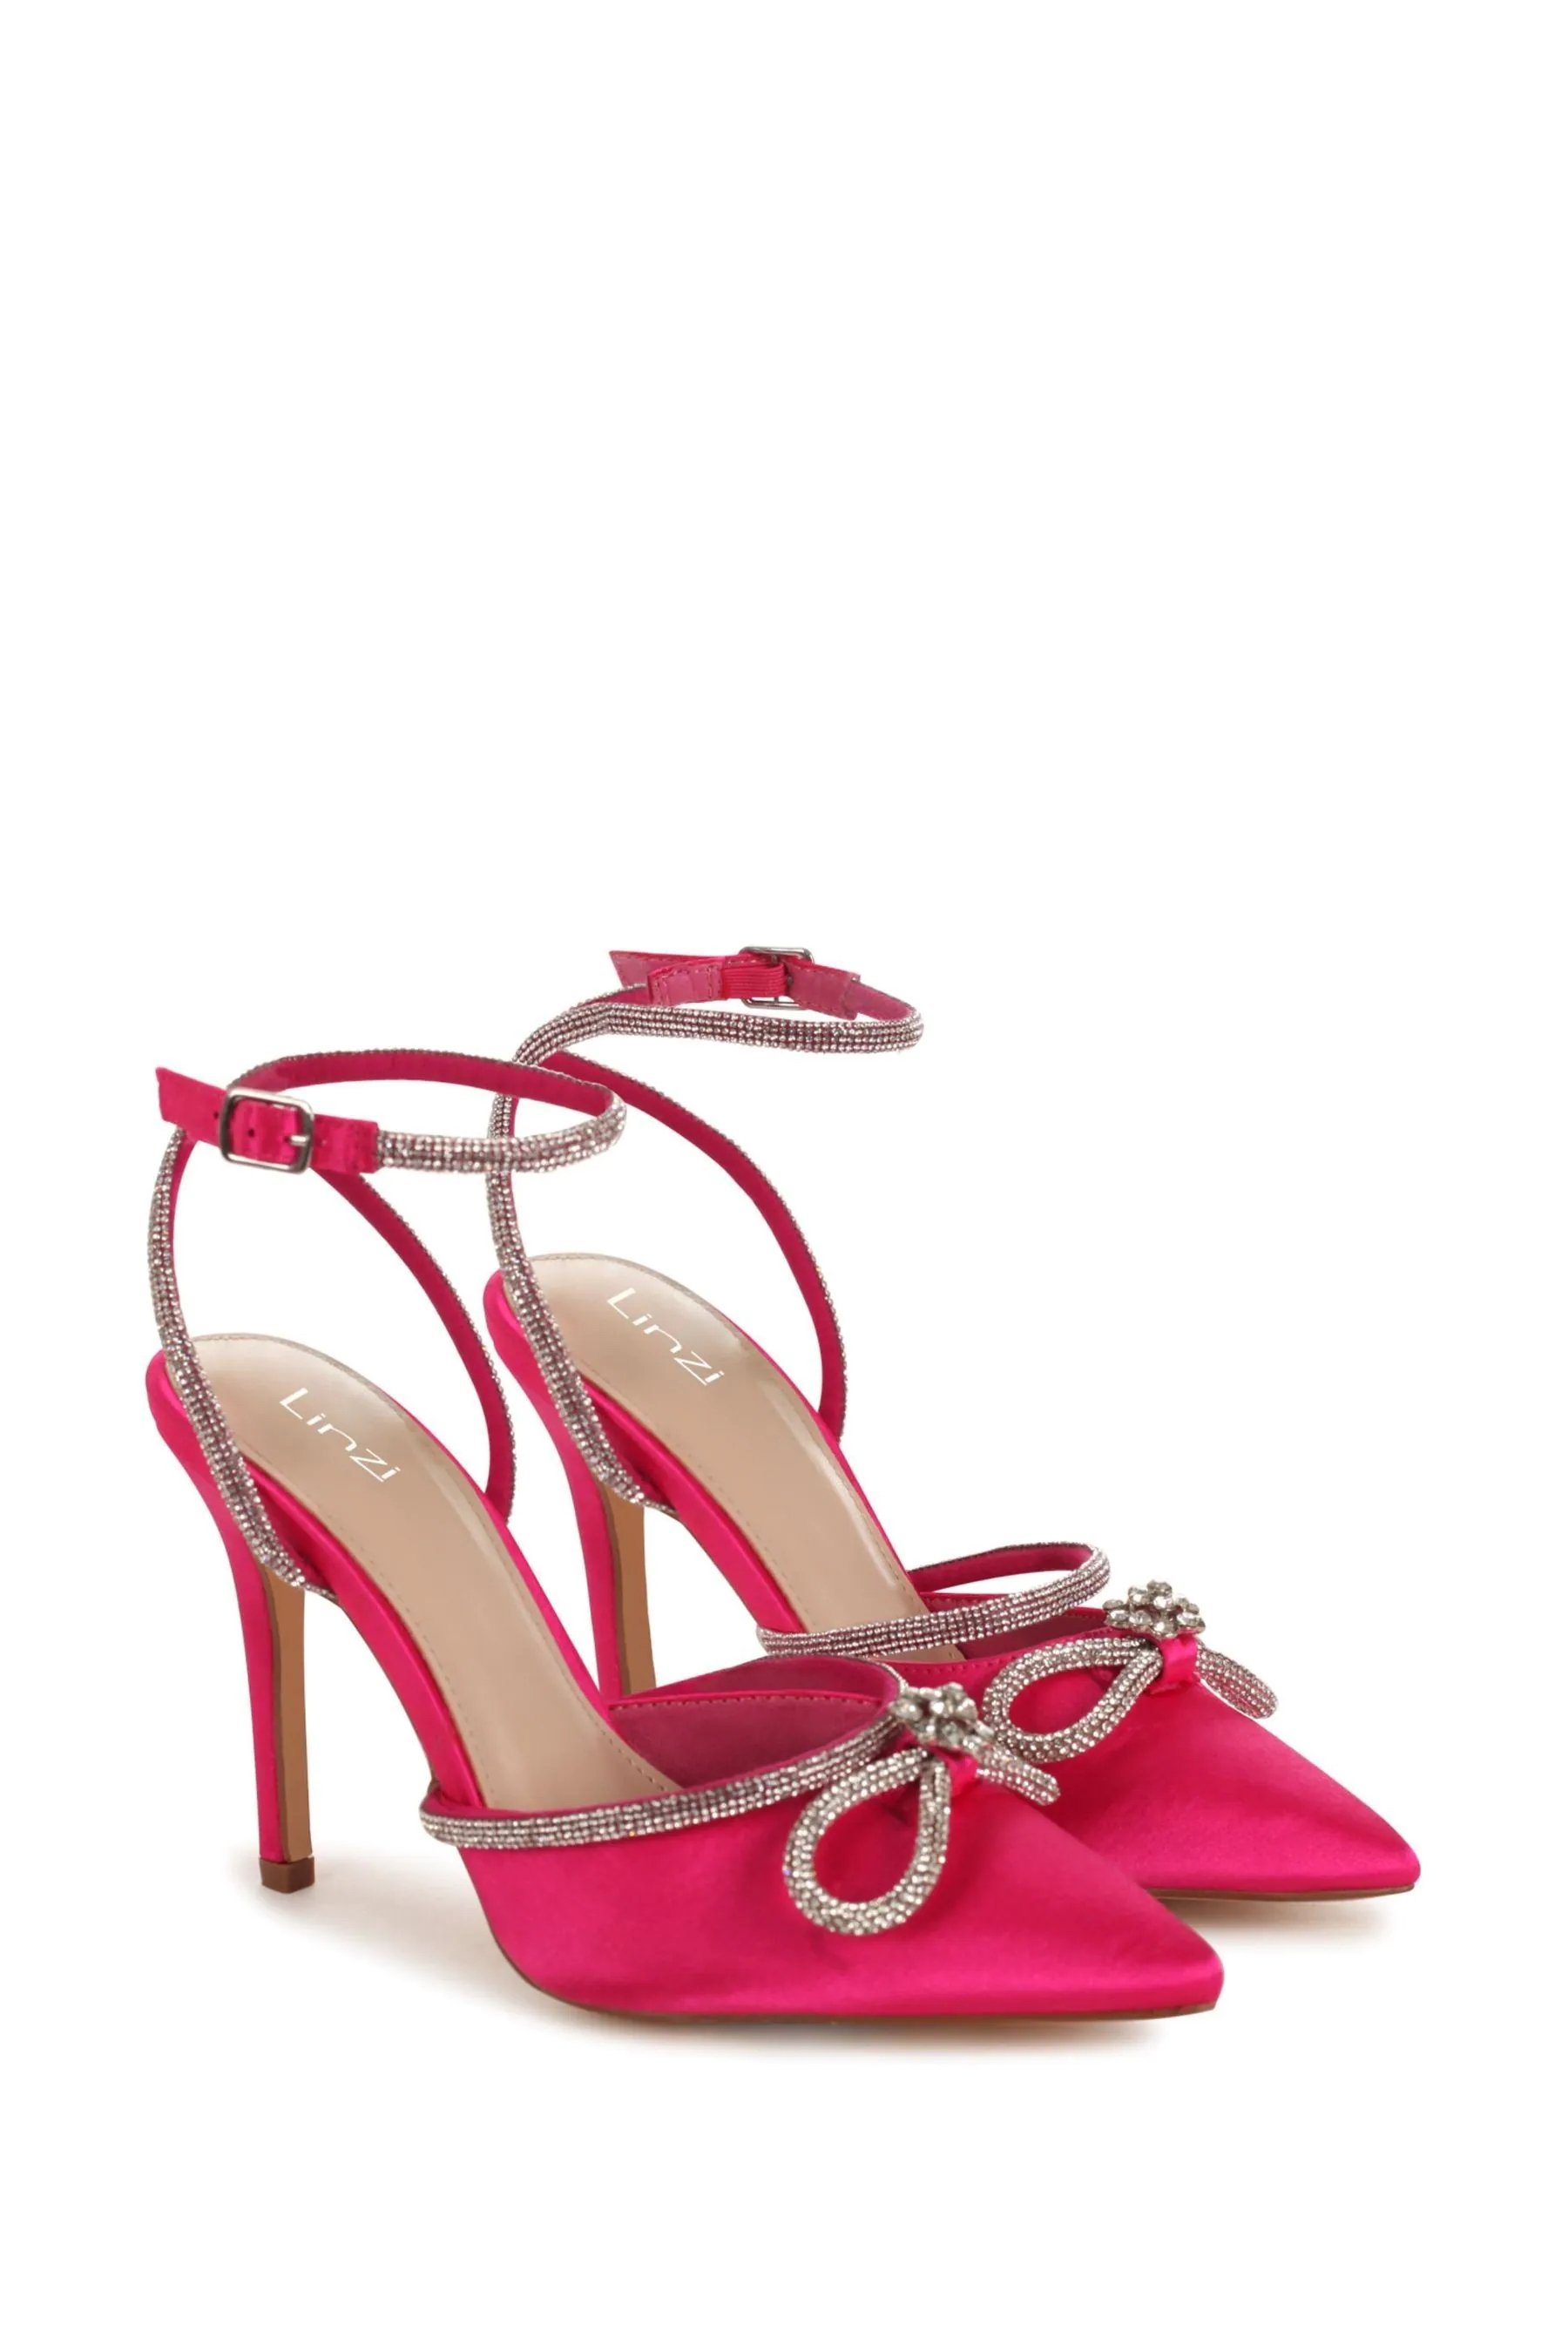 Linzi Forever Court Heeled Sandal With Diamante Bow Trim €52